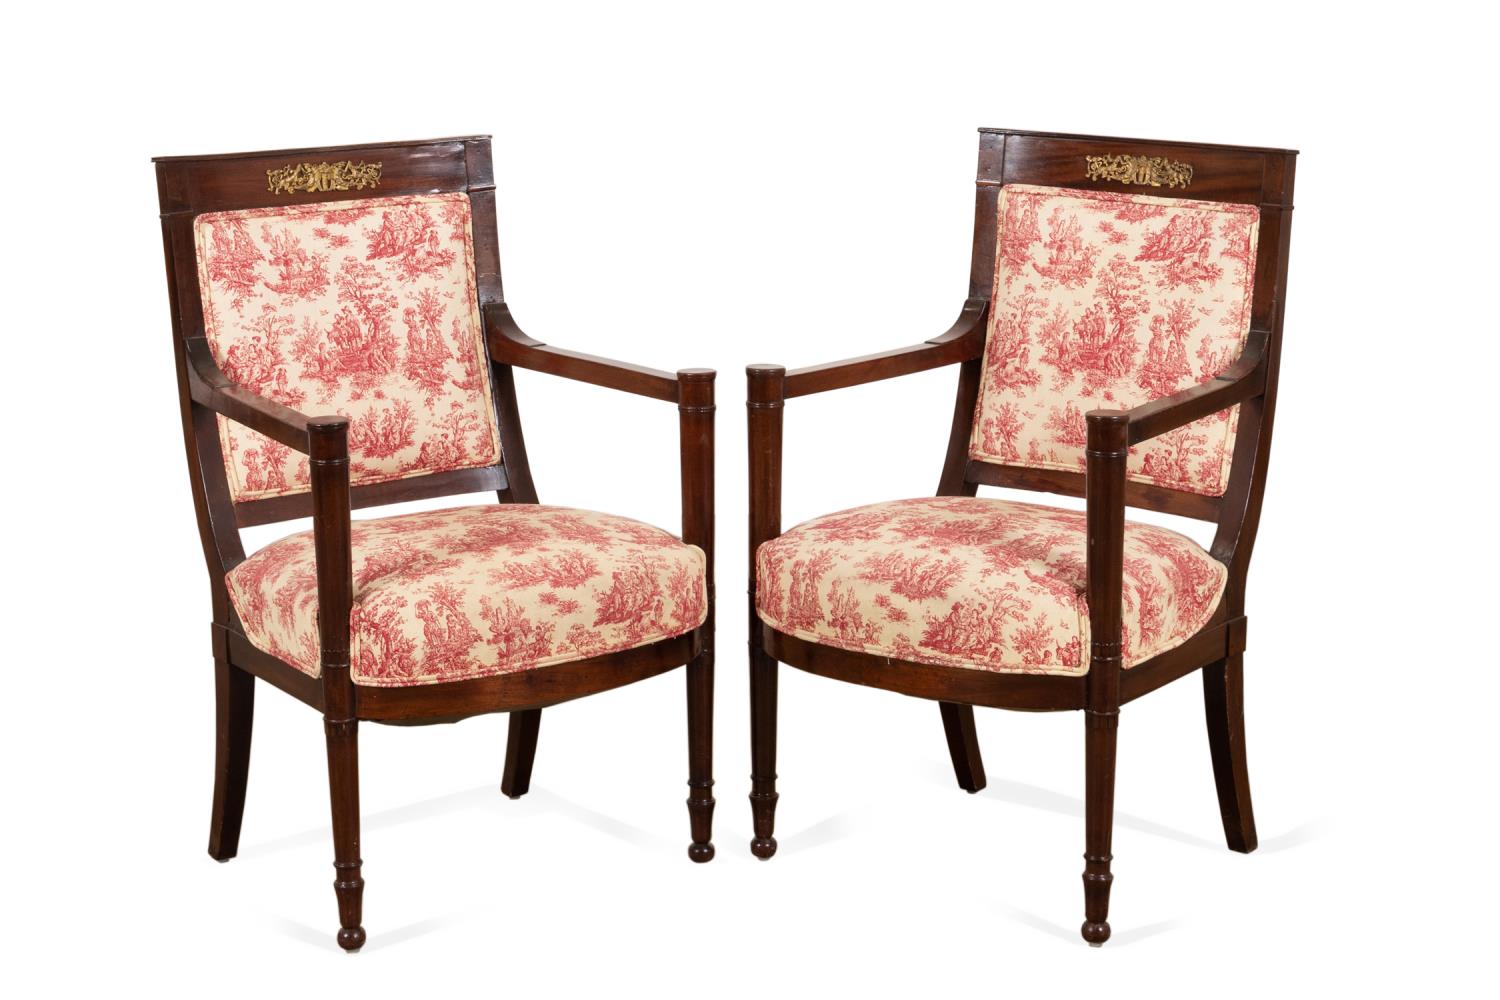 PAIR FRENCH EMPIRE STYLE ARMCHAIRS,